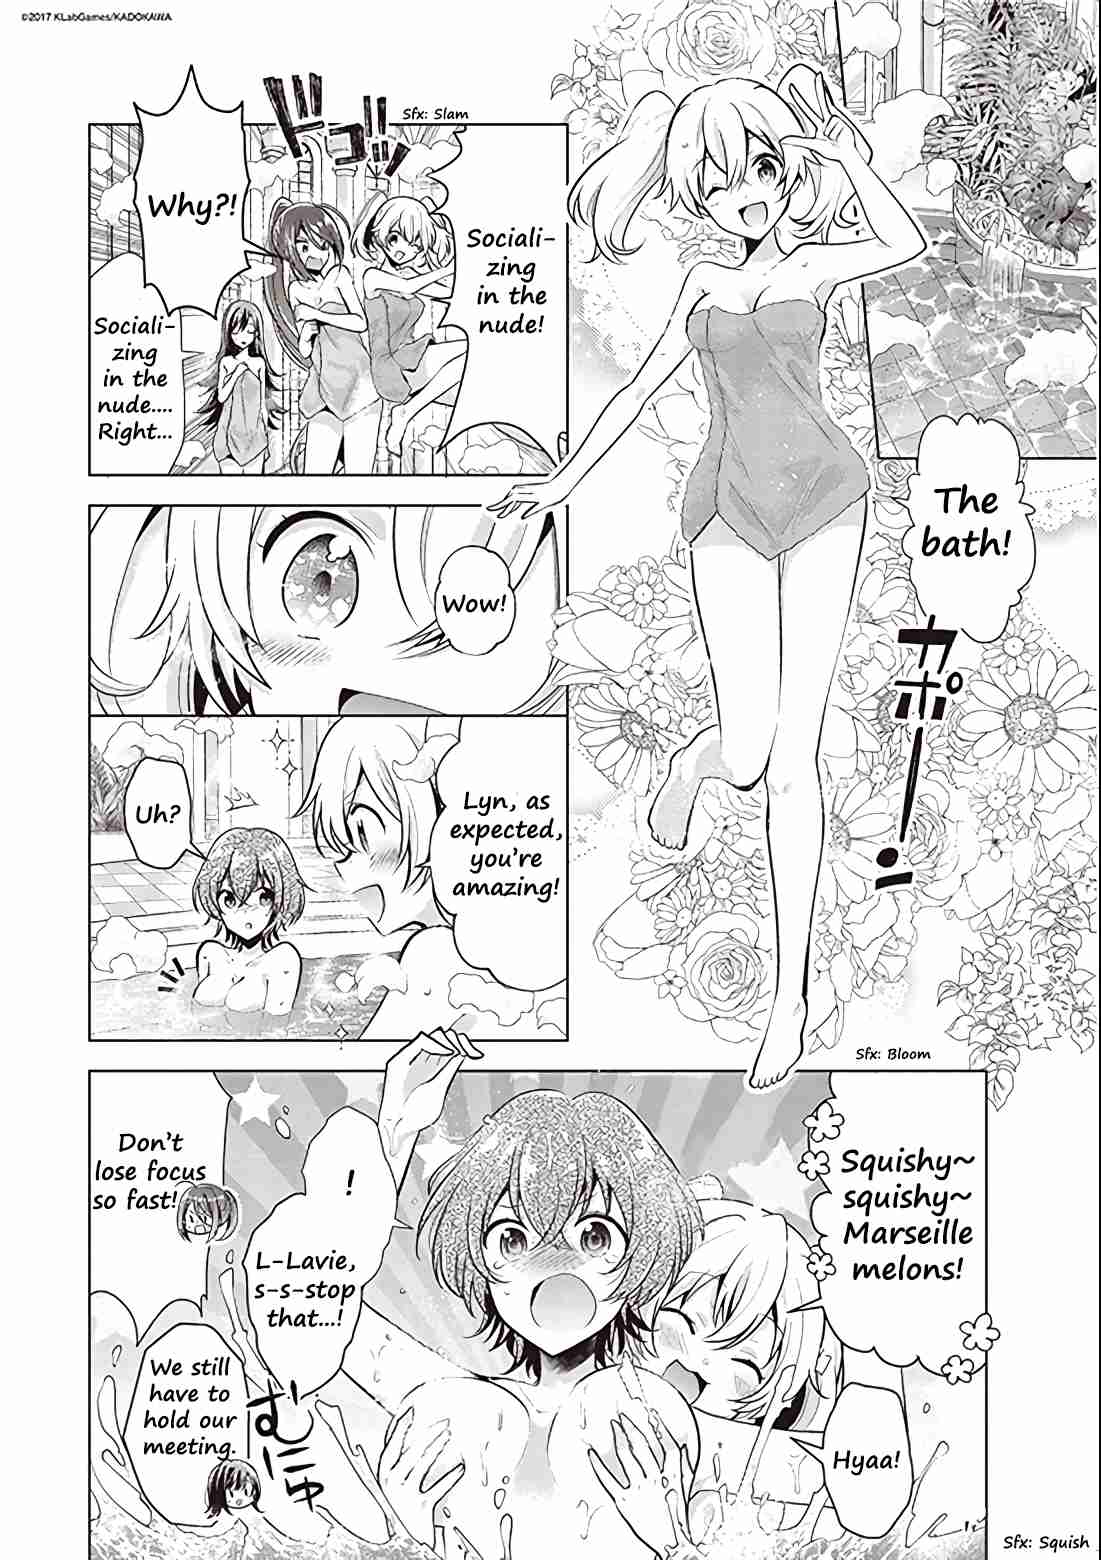 Lapis Re:LiGHTs Web Comic (Our Prelude) Vol. 1 Ch. 1 Our Prelude (LiGHTs)